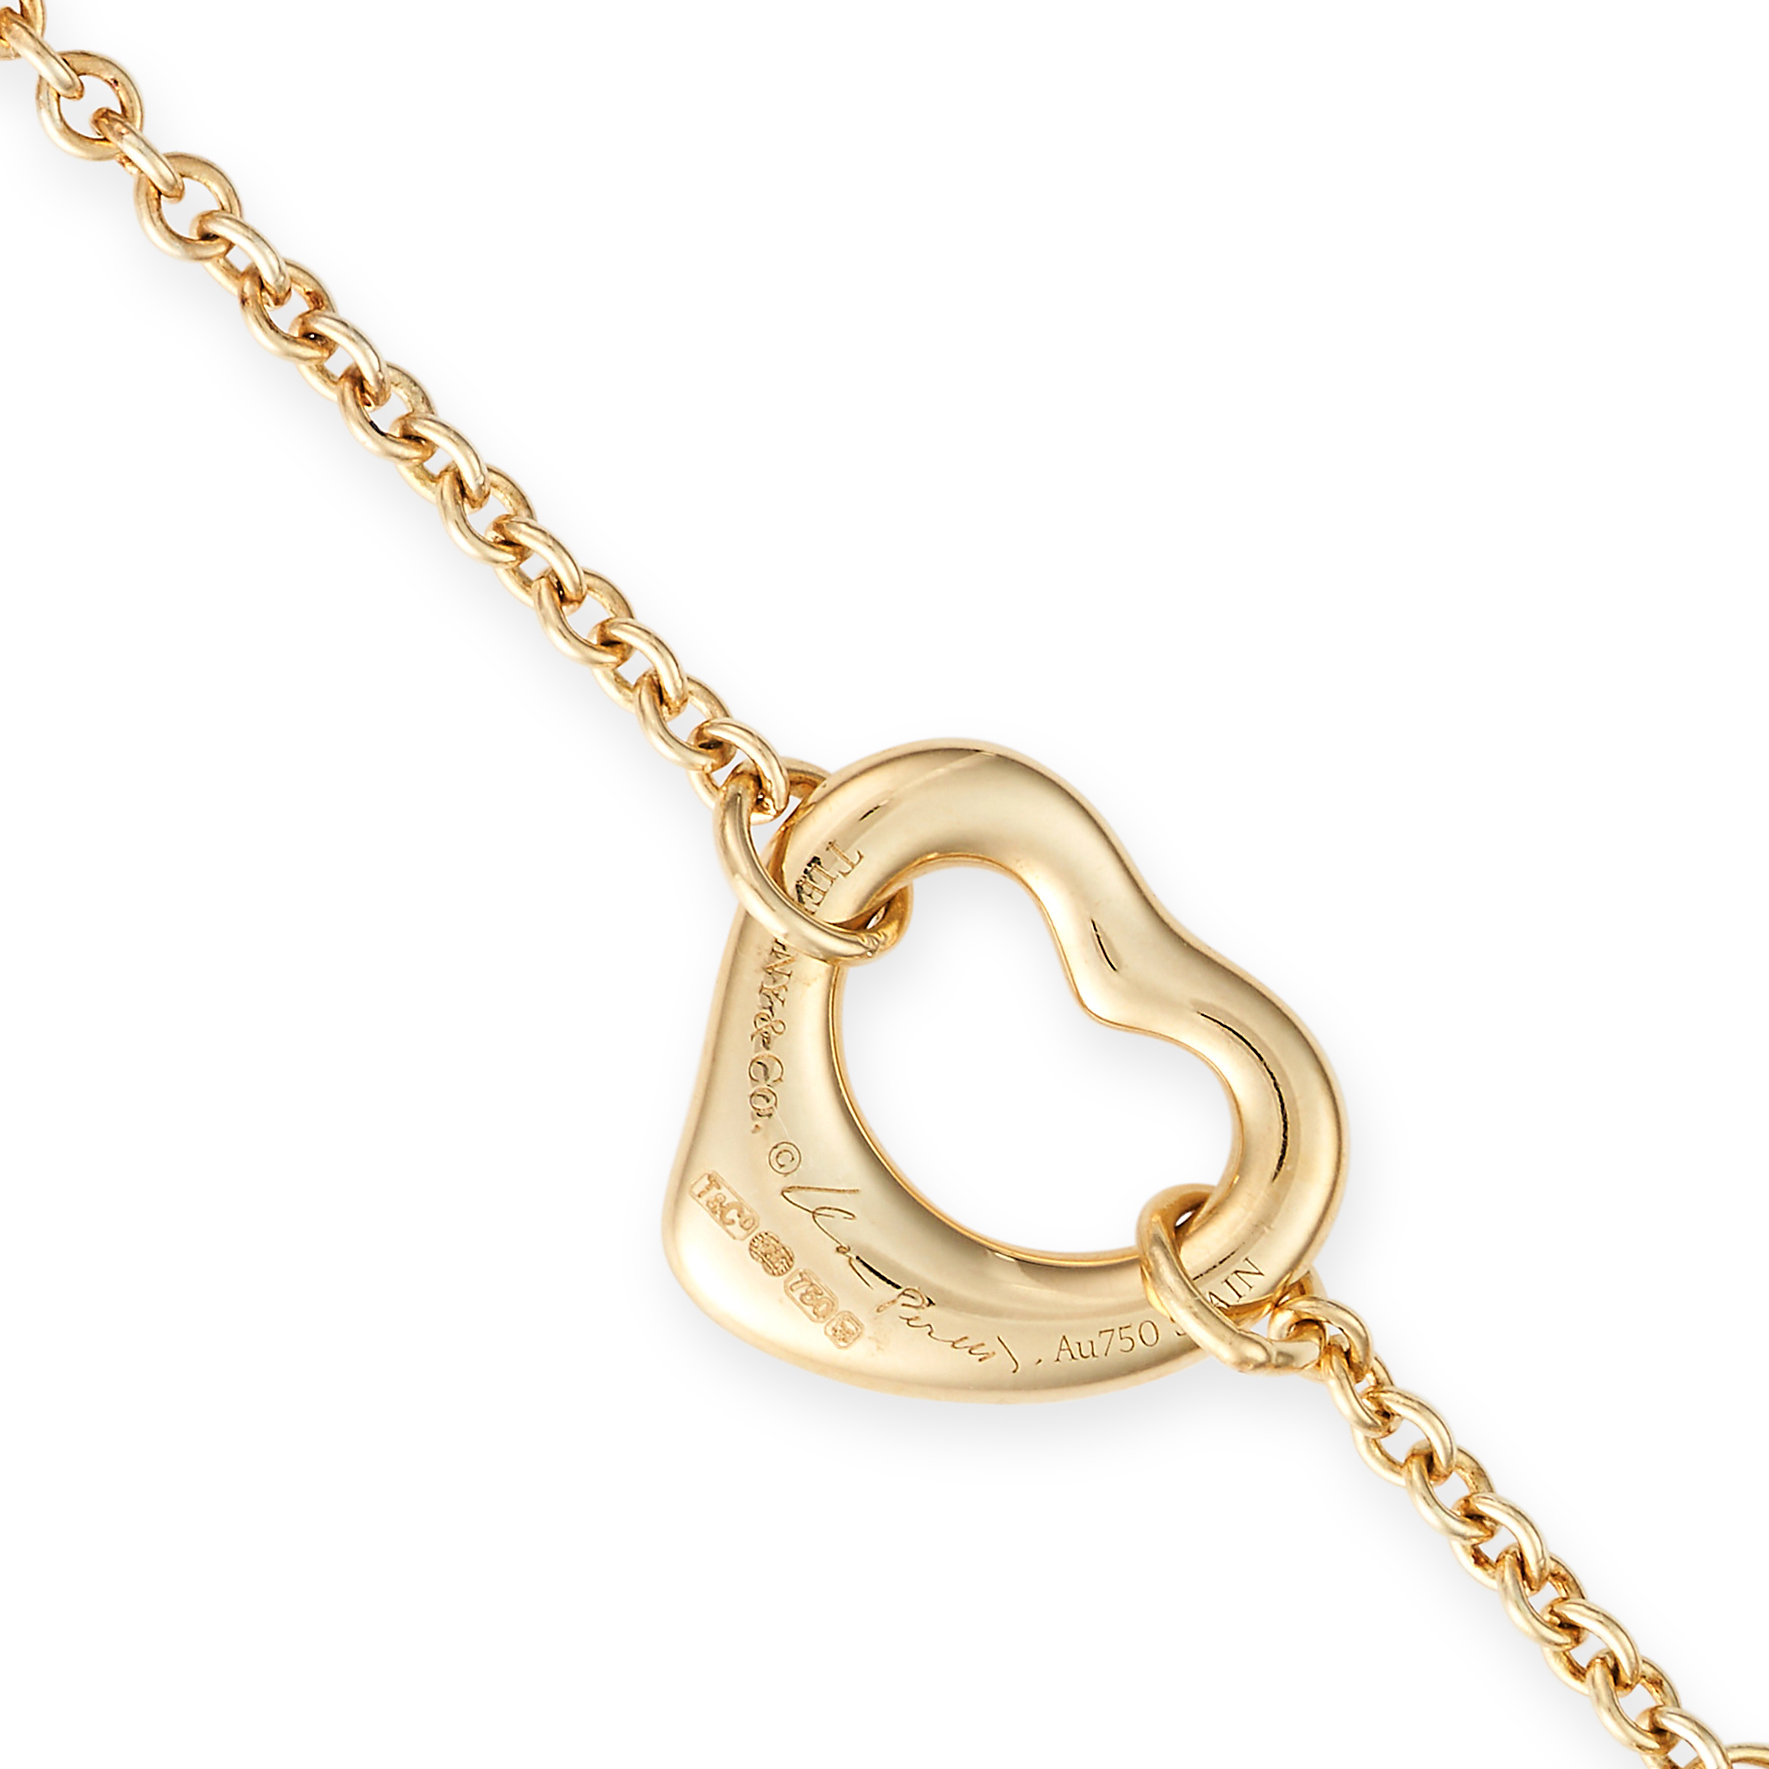 ELSA PERETTI FOR TIFFANY & CO., AN OPEN HEART BRACELET in 18ct yellow gold, comprising a trace ch... - Image 2 of 2